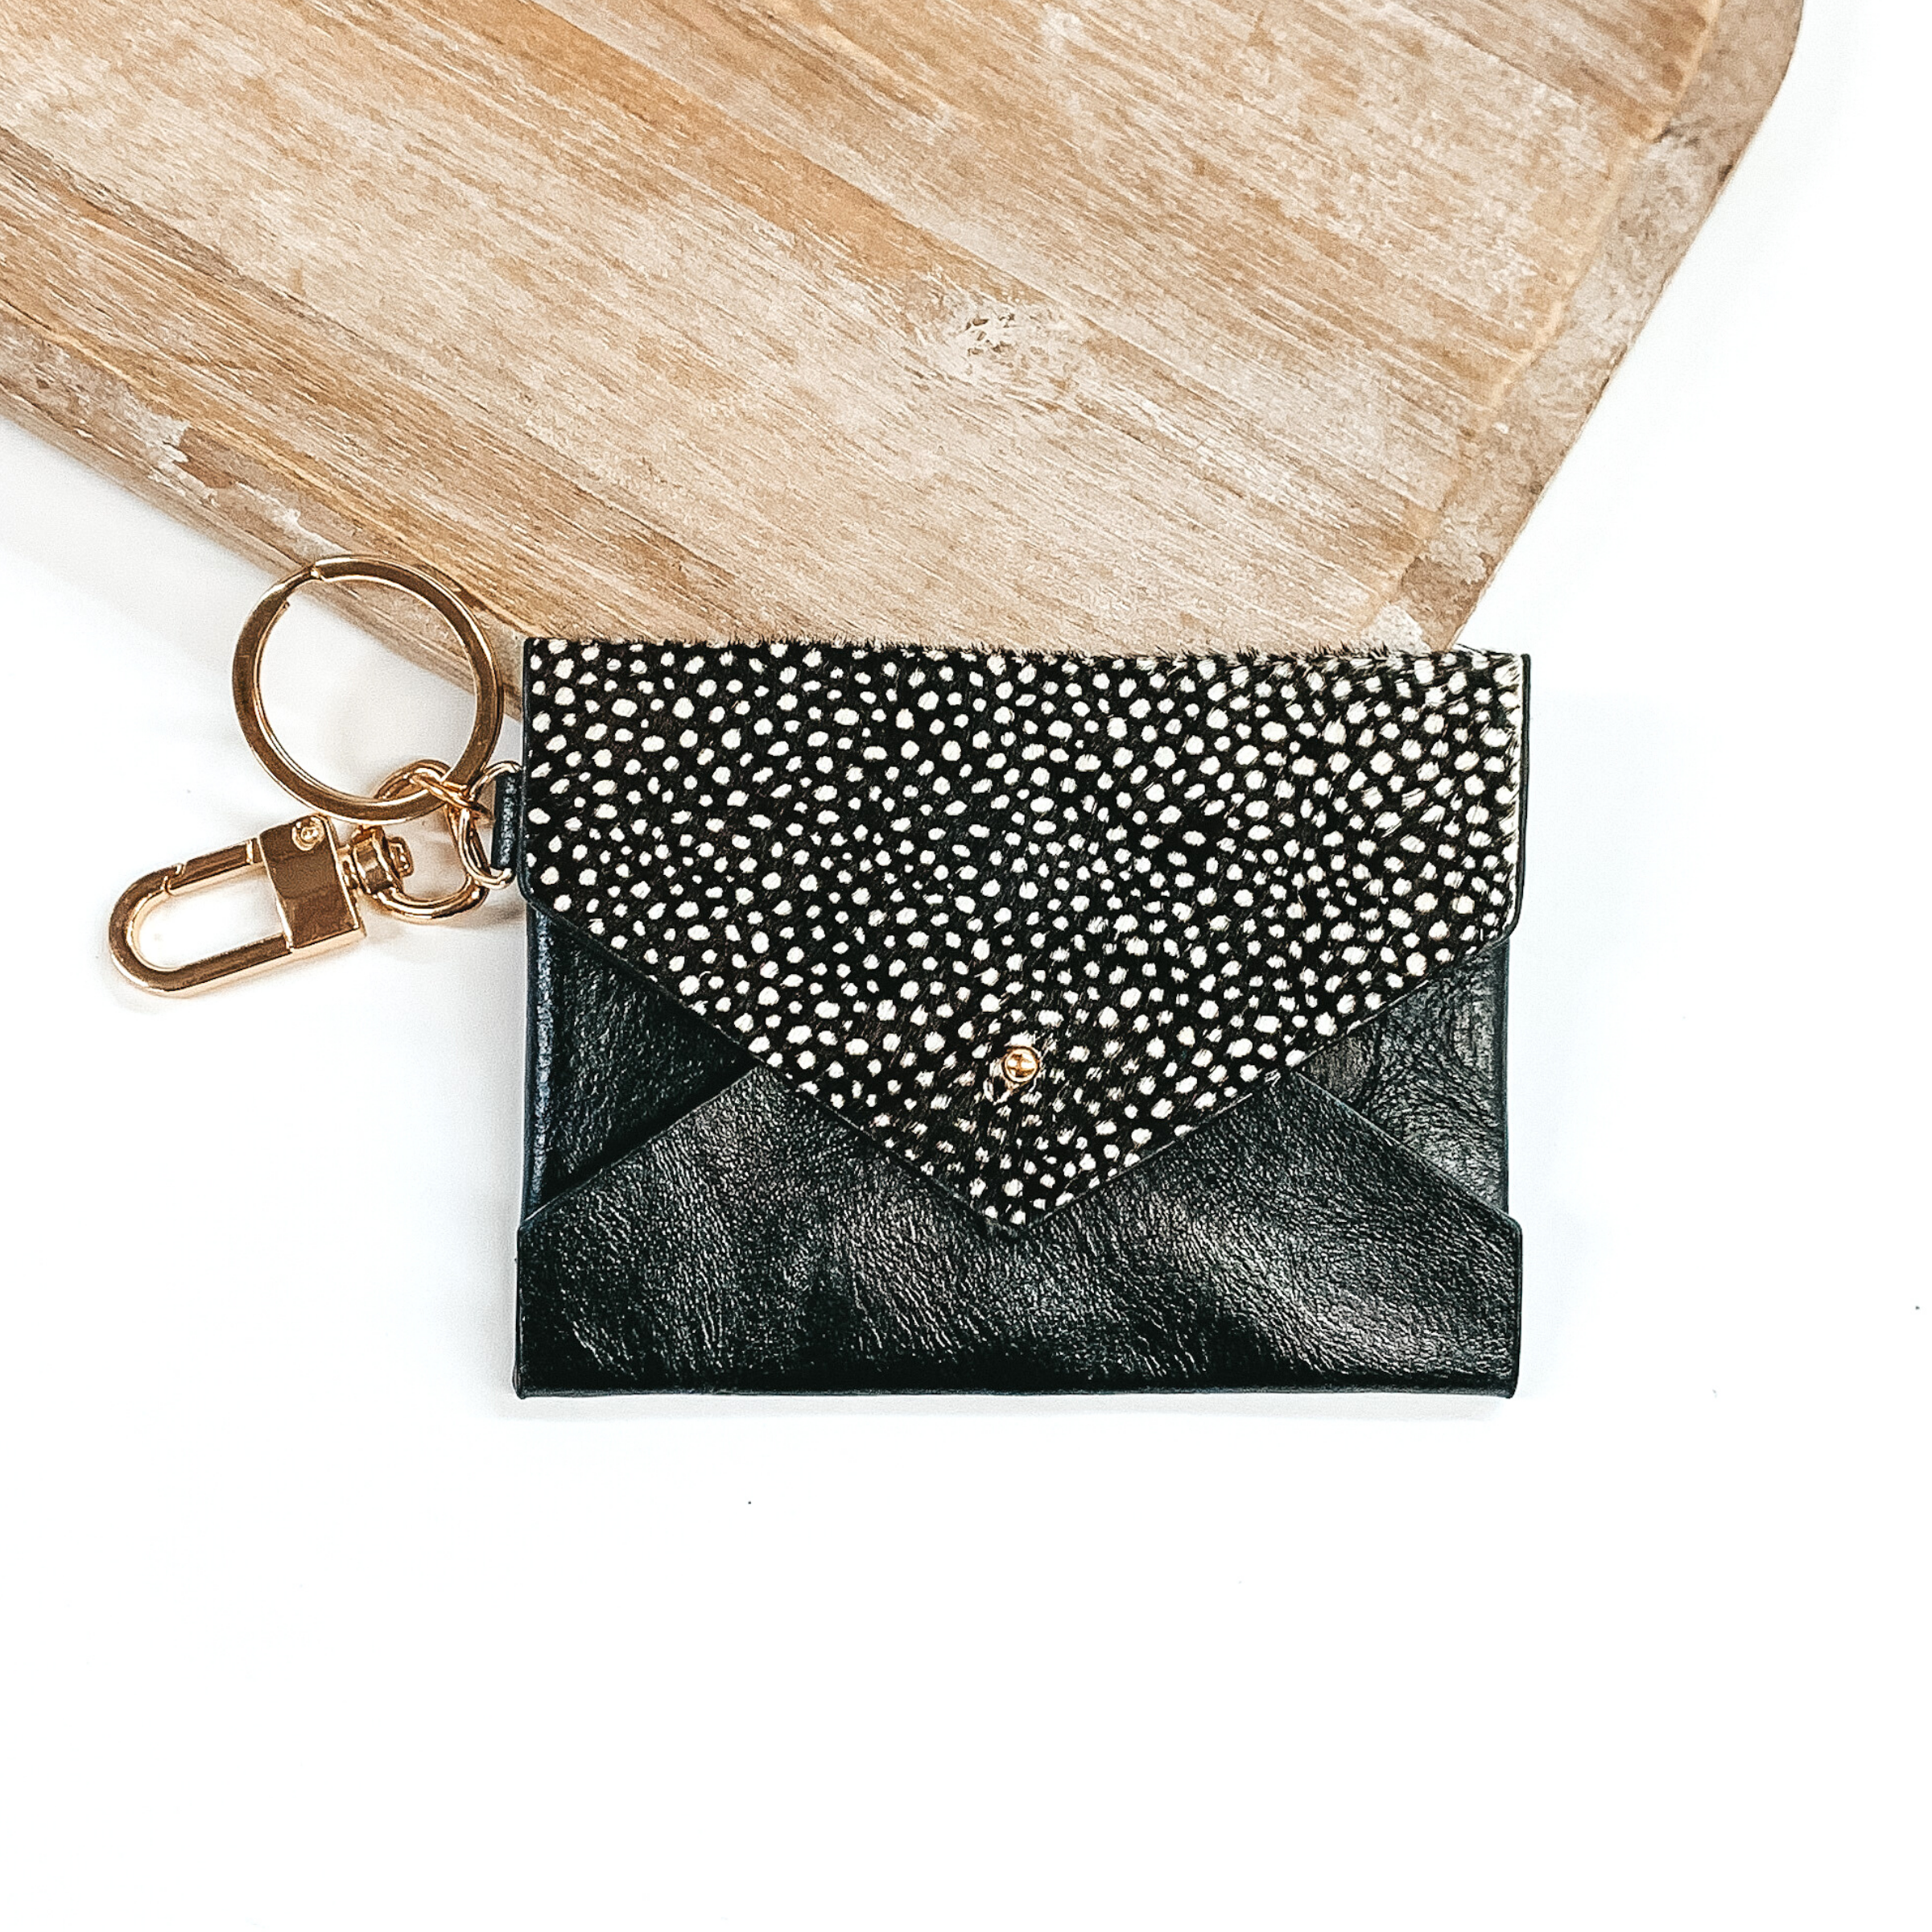 Handcrafted black women's heart purse with golden key ring | MADE IN ITALY